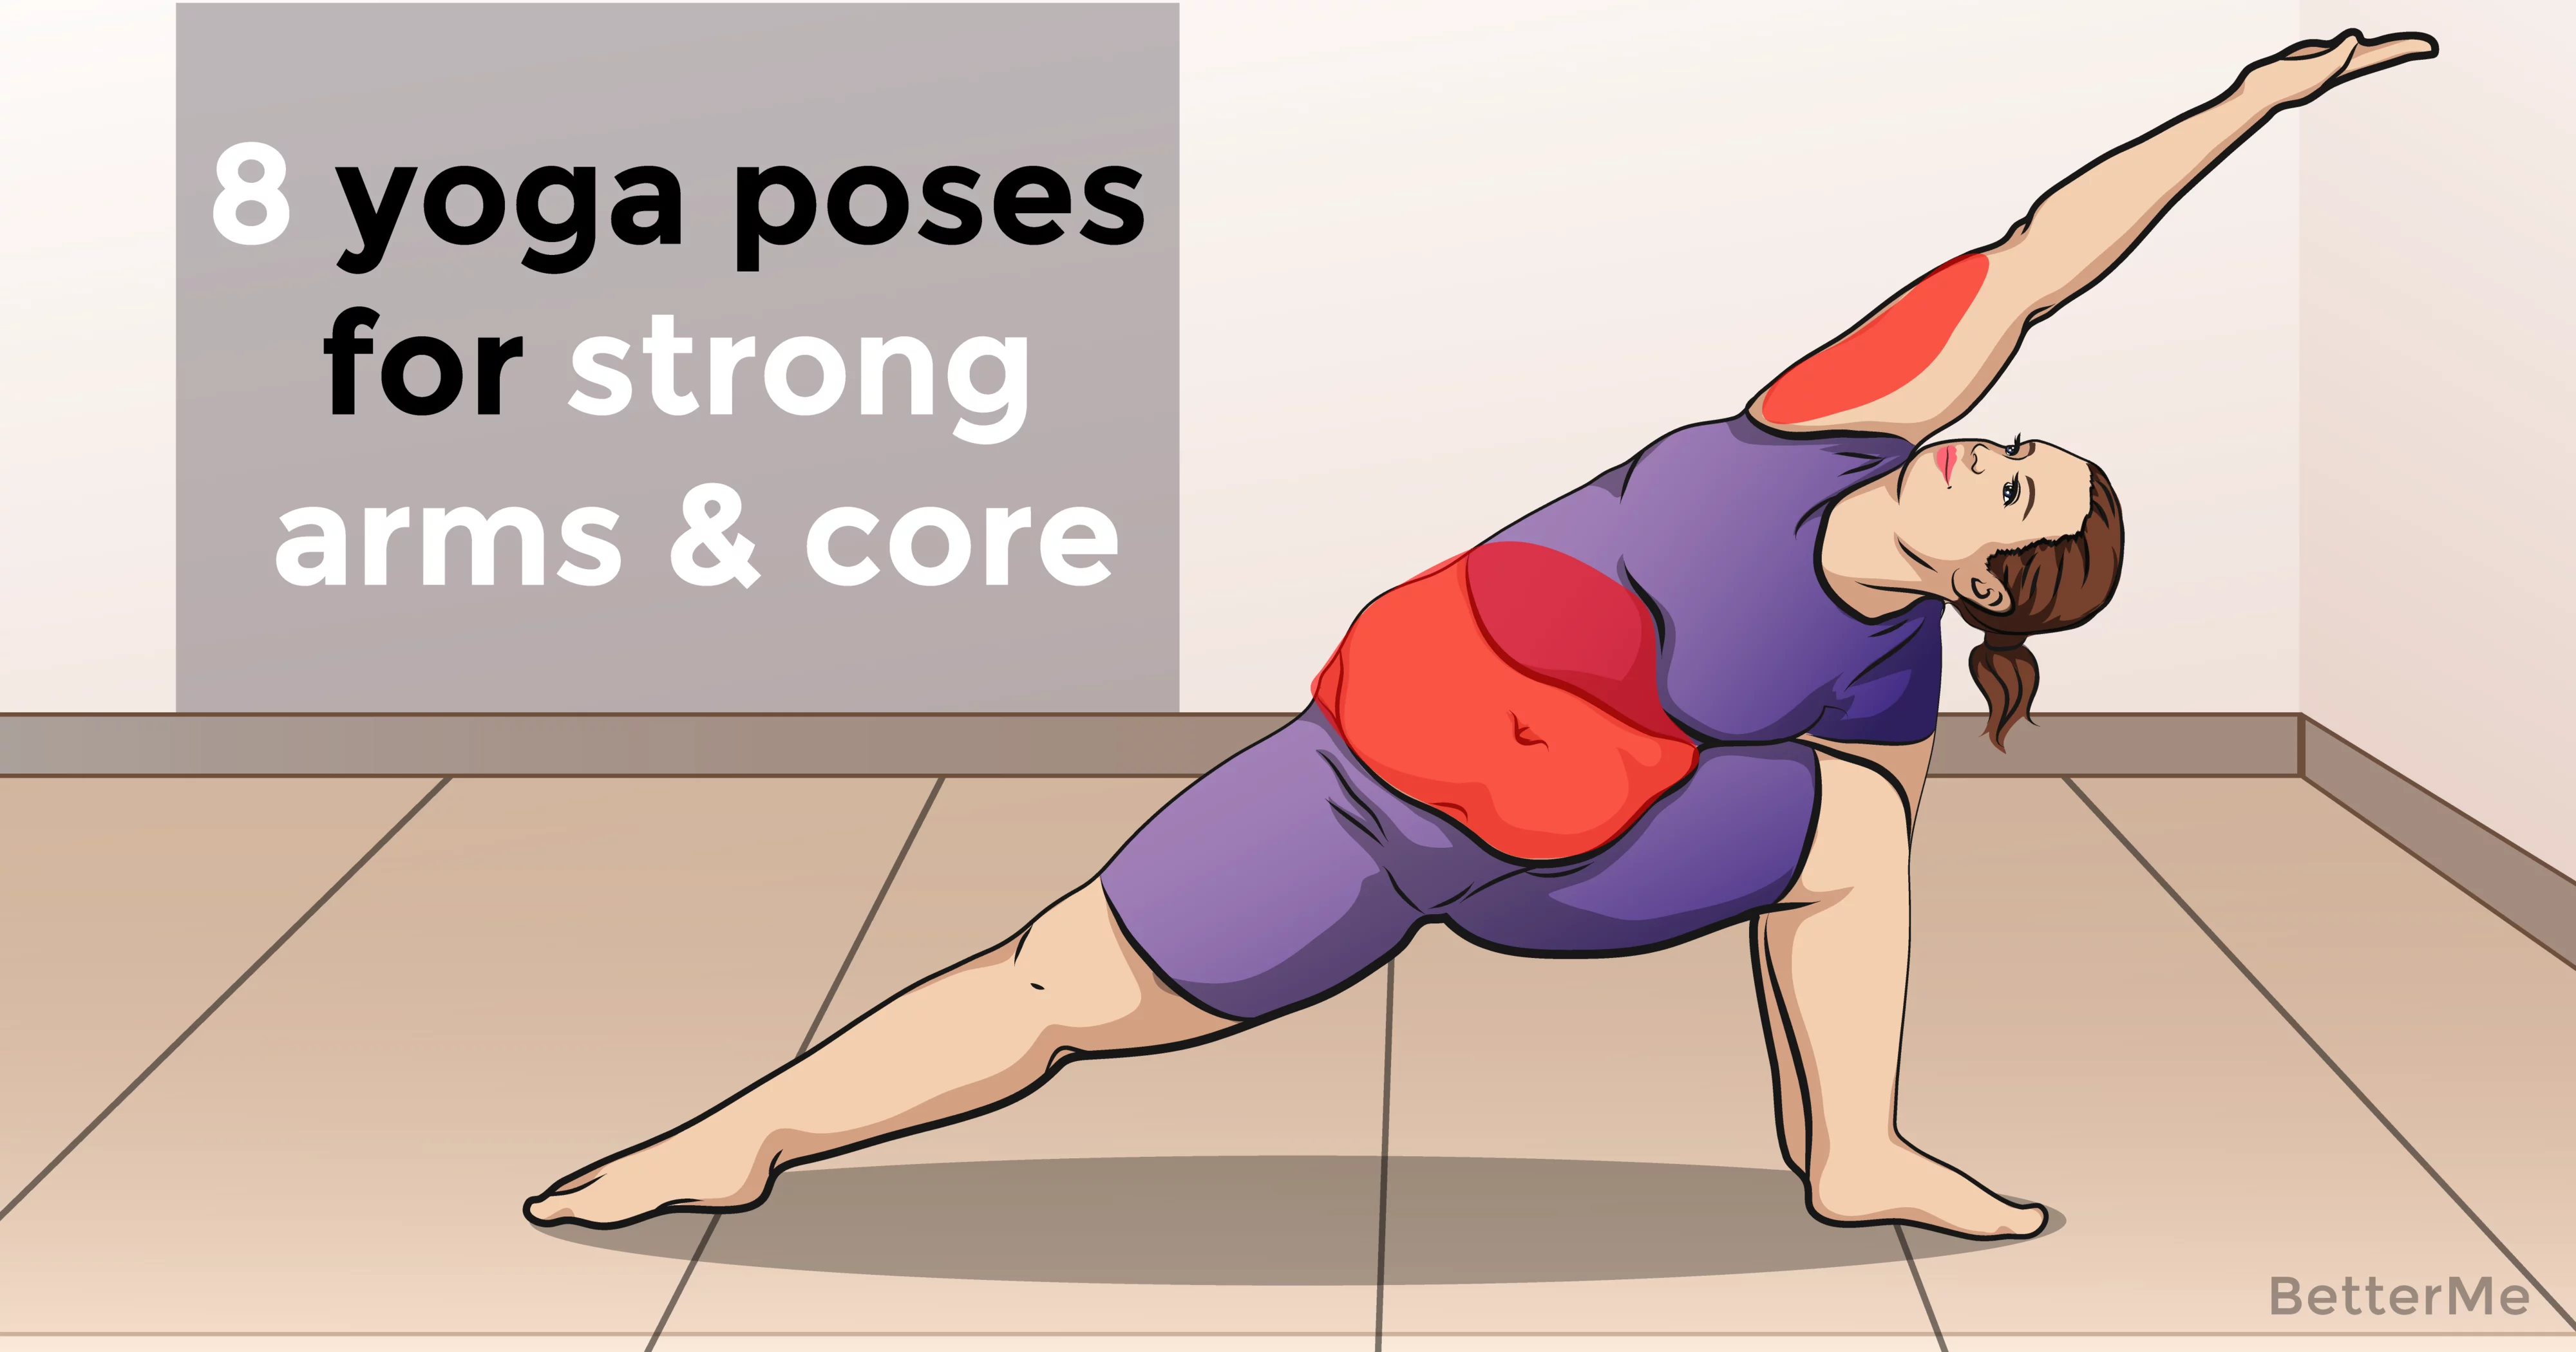 8 yoga poses for strong arms & core